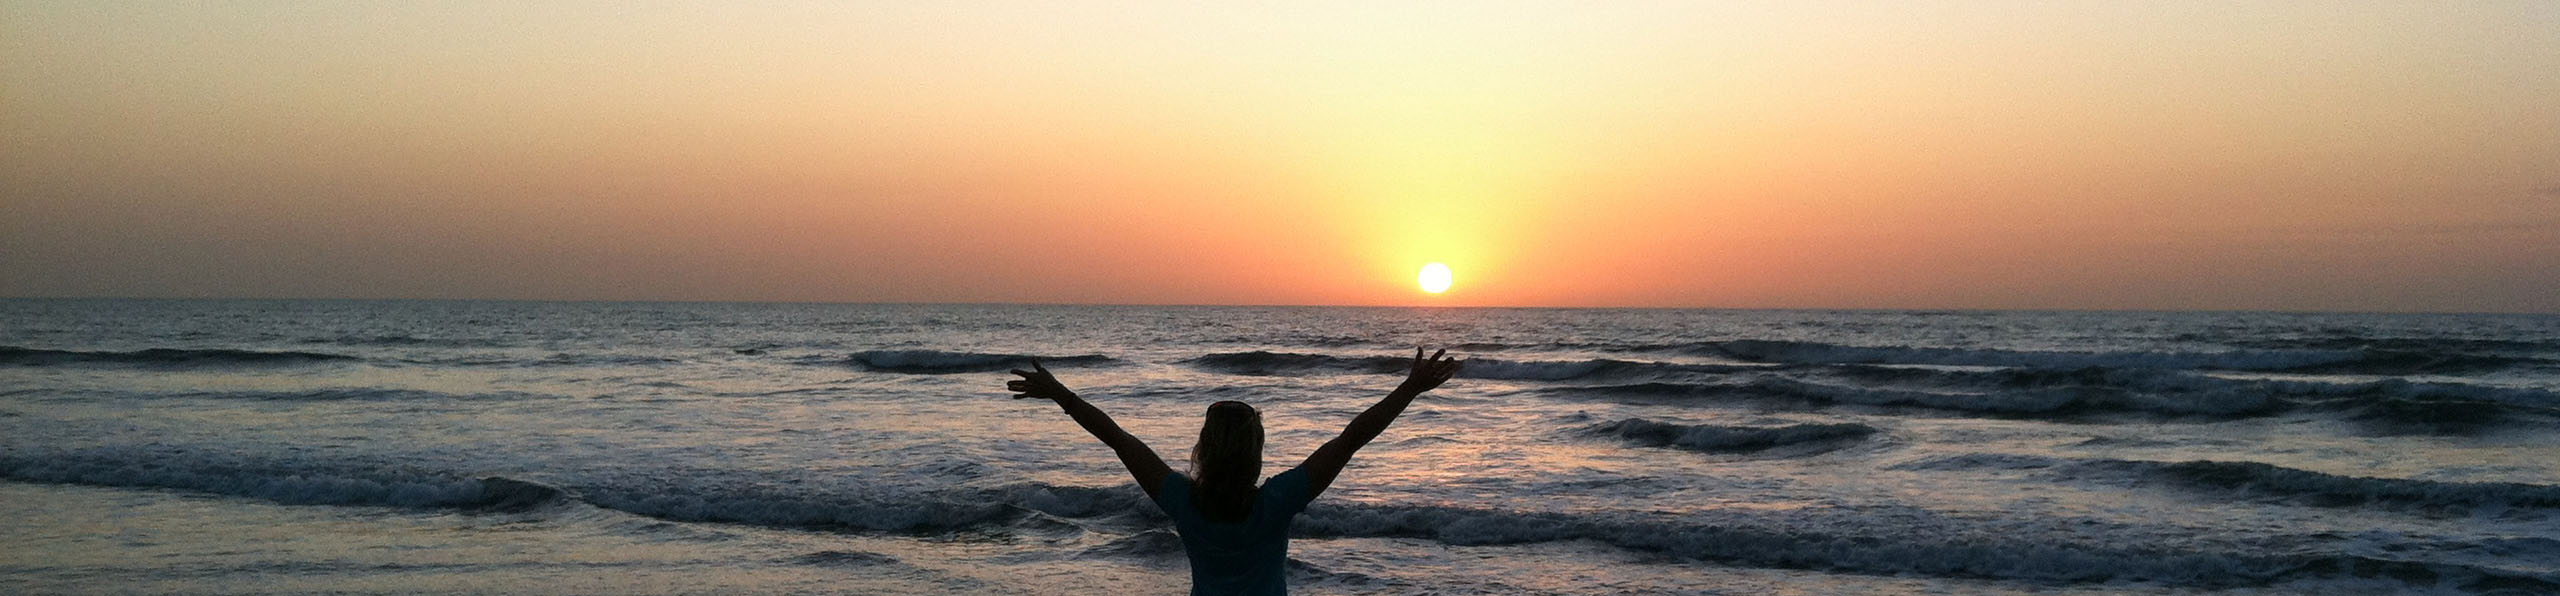 A woman with raised arms at the ocean at sunset.